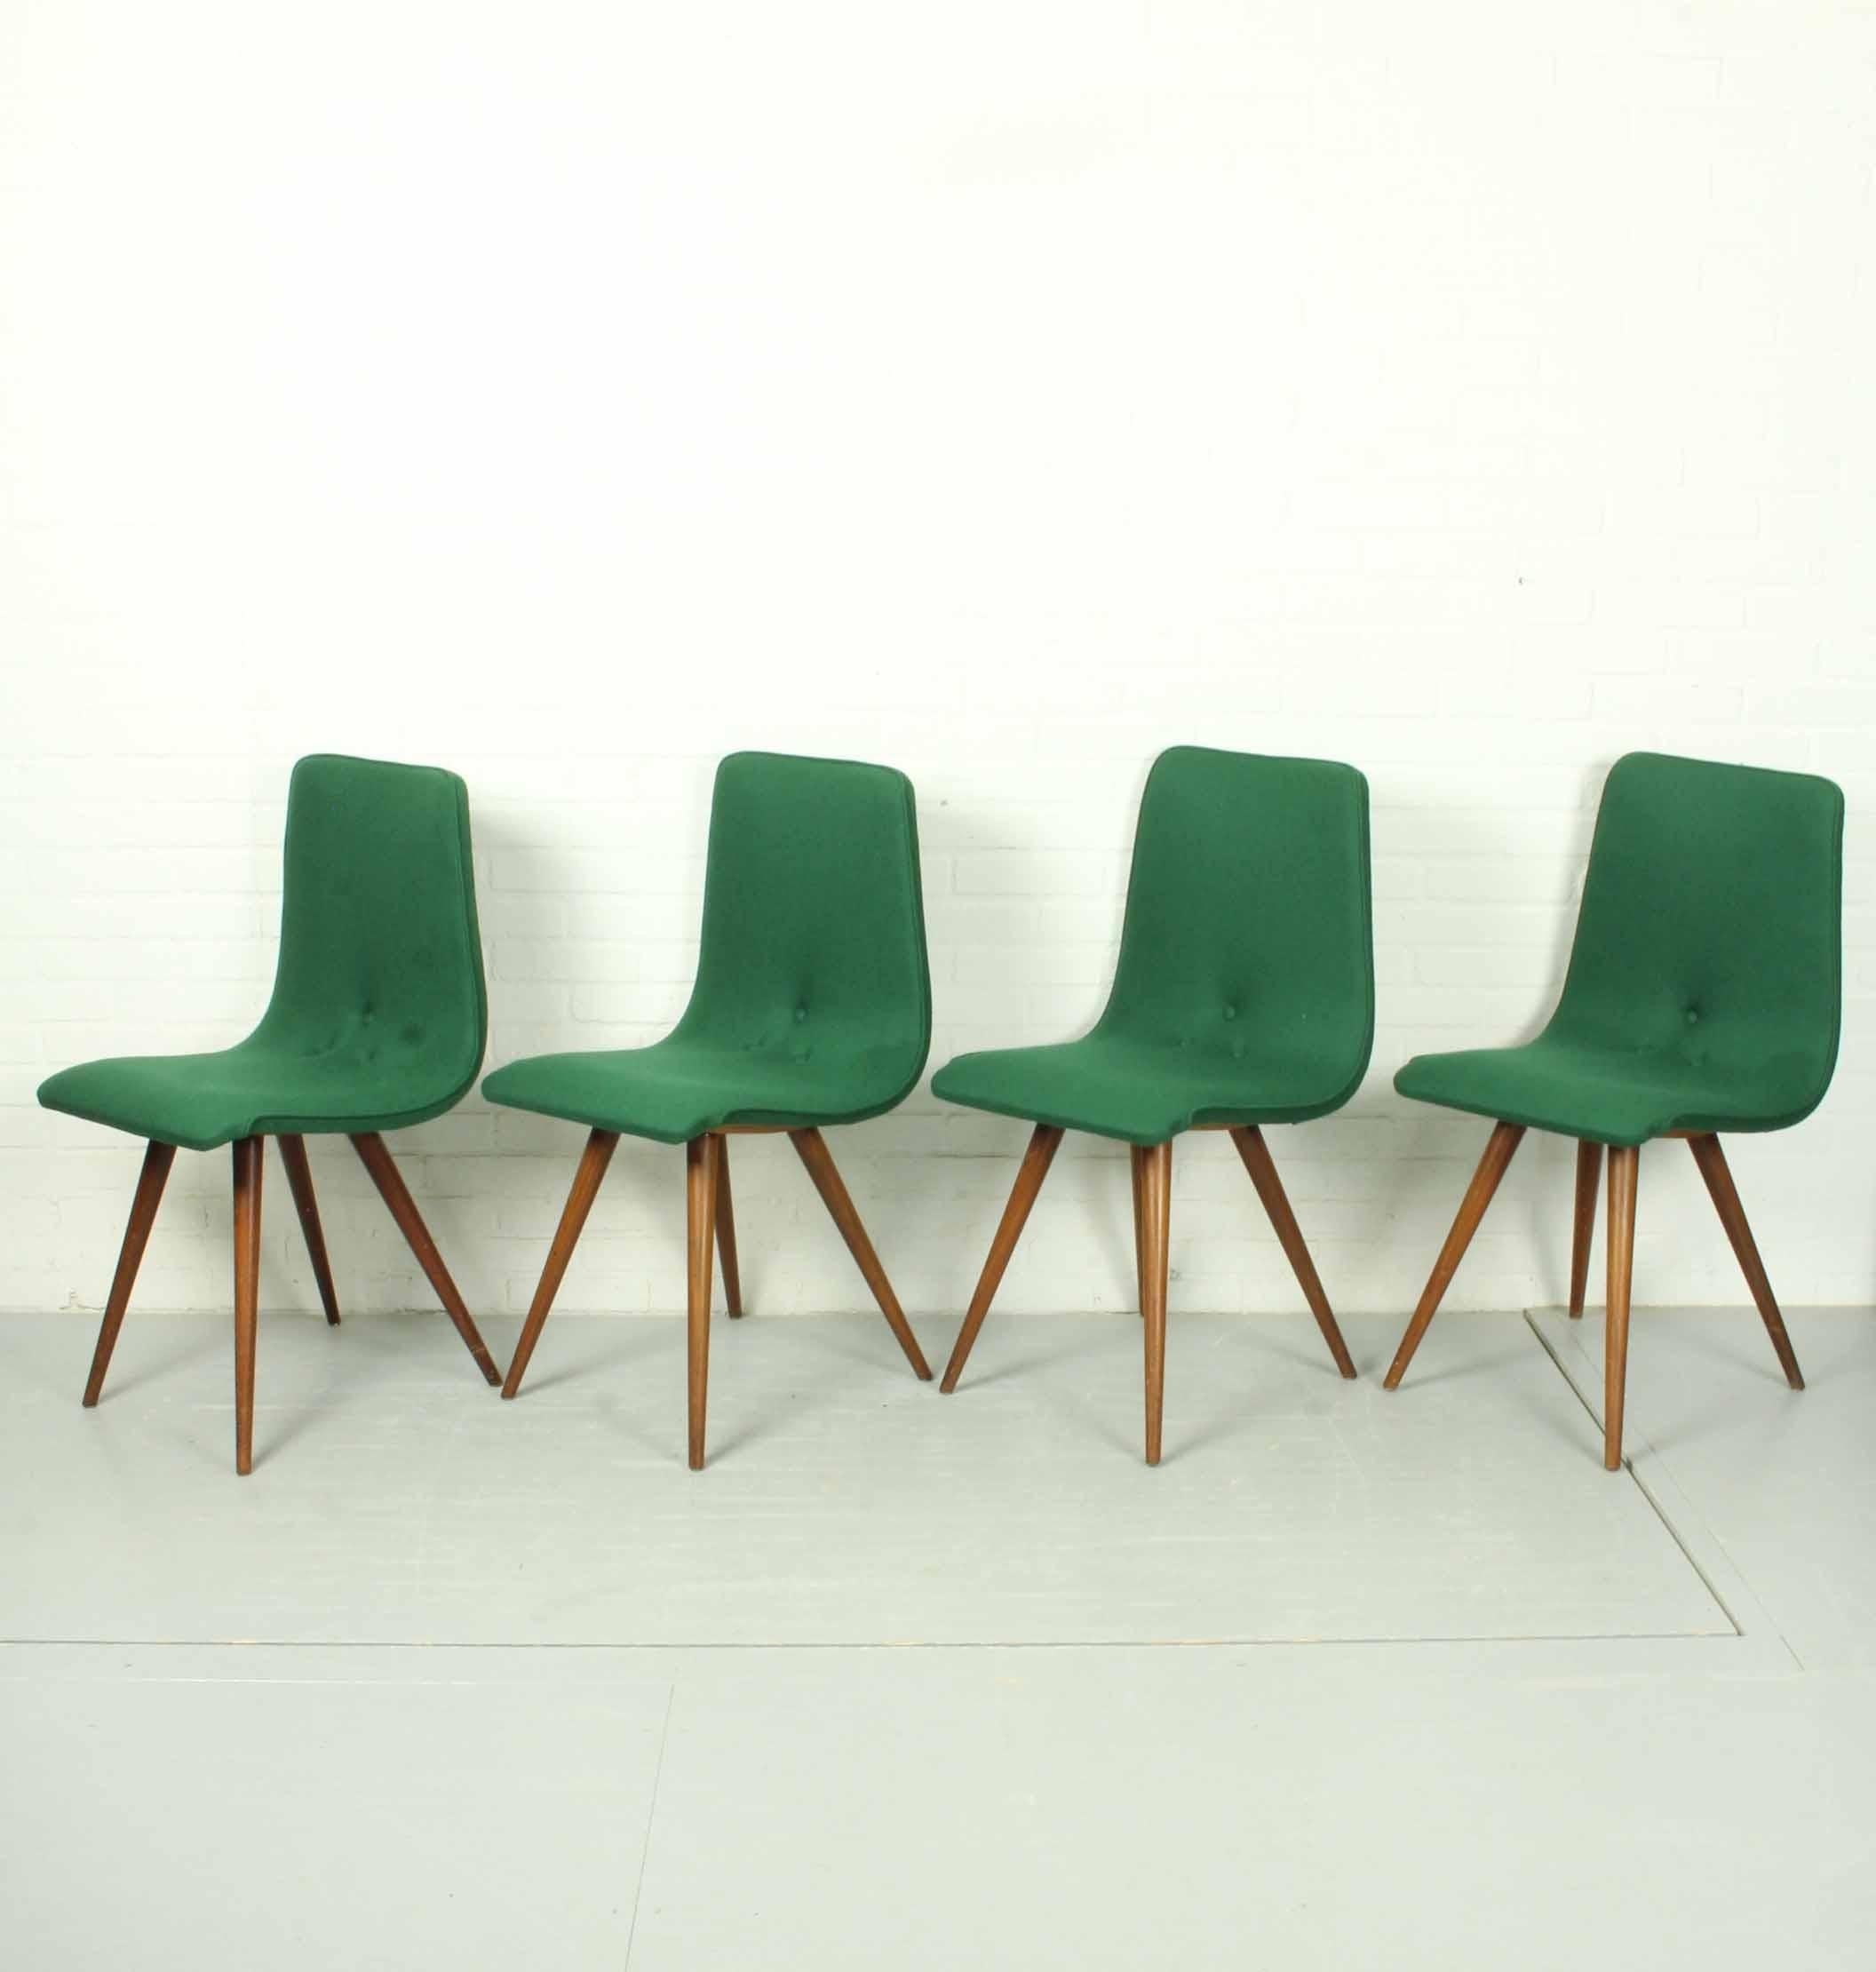 20th Century Set of 4 Teak Dining Chairs by Van Os, 1950s For Sale